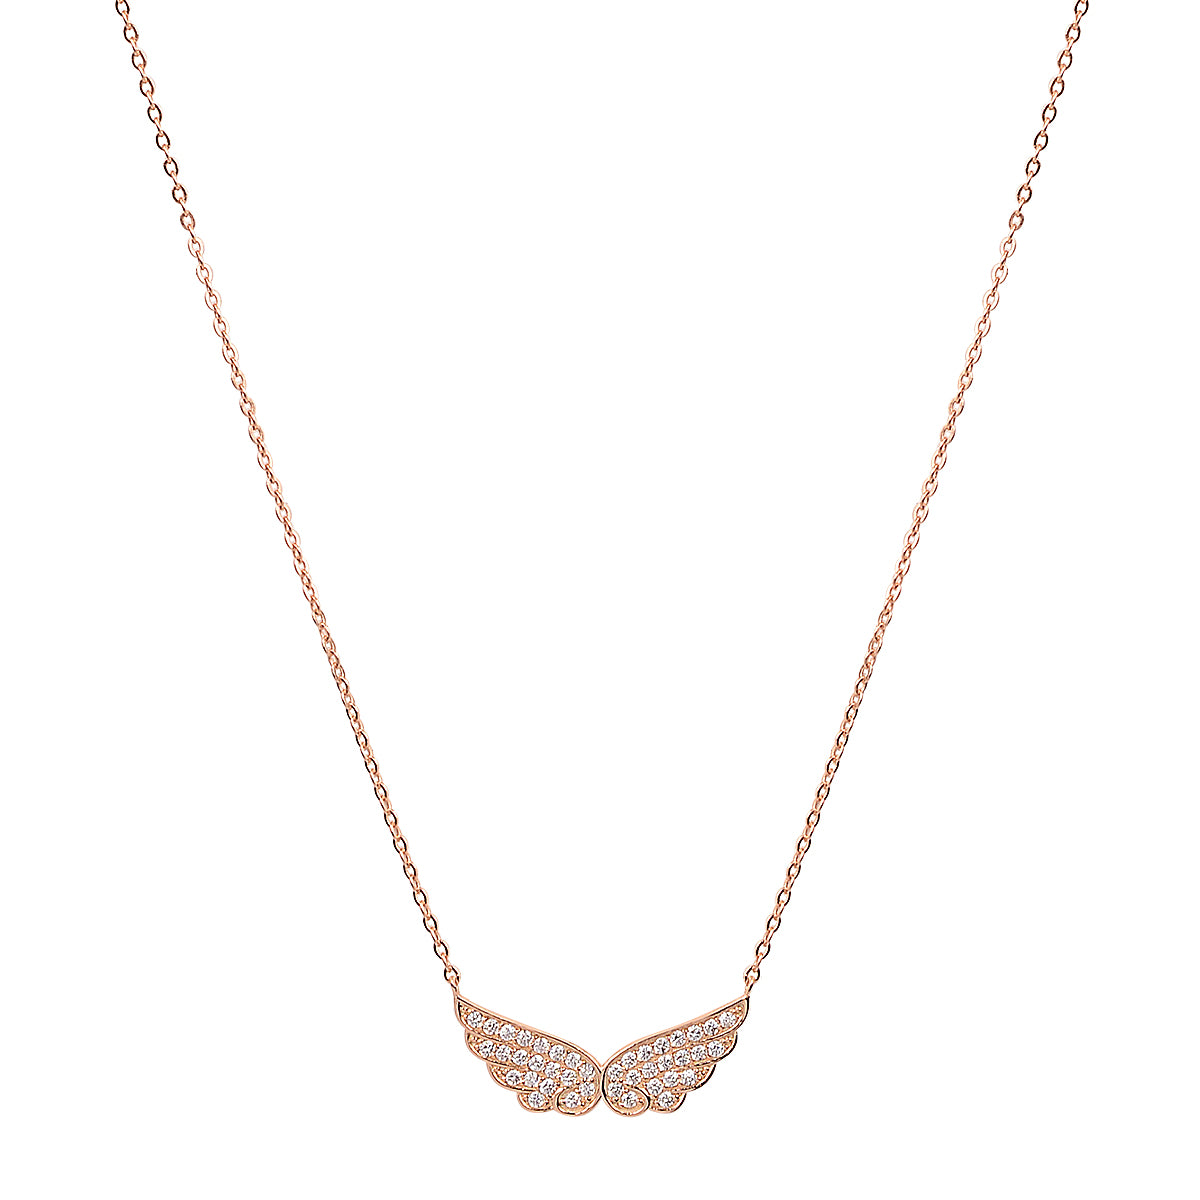 Angel wings rose gold necklace 